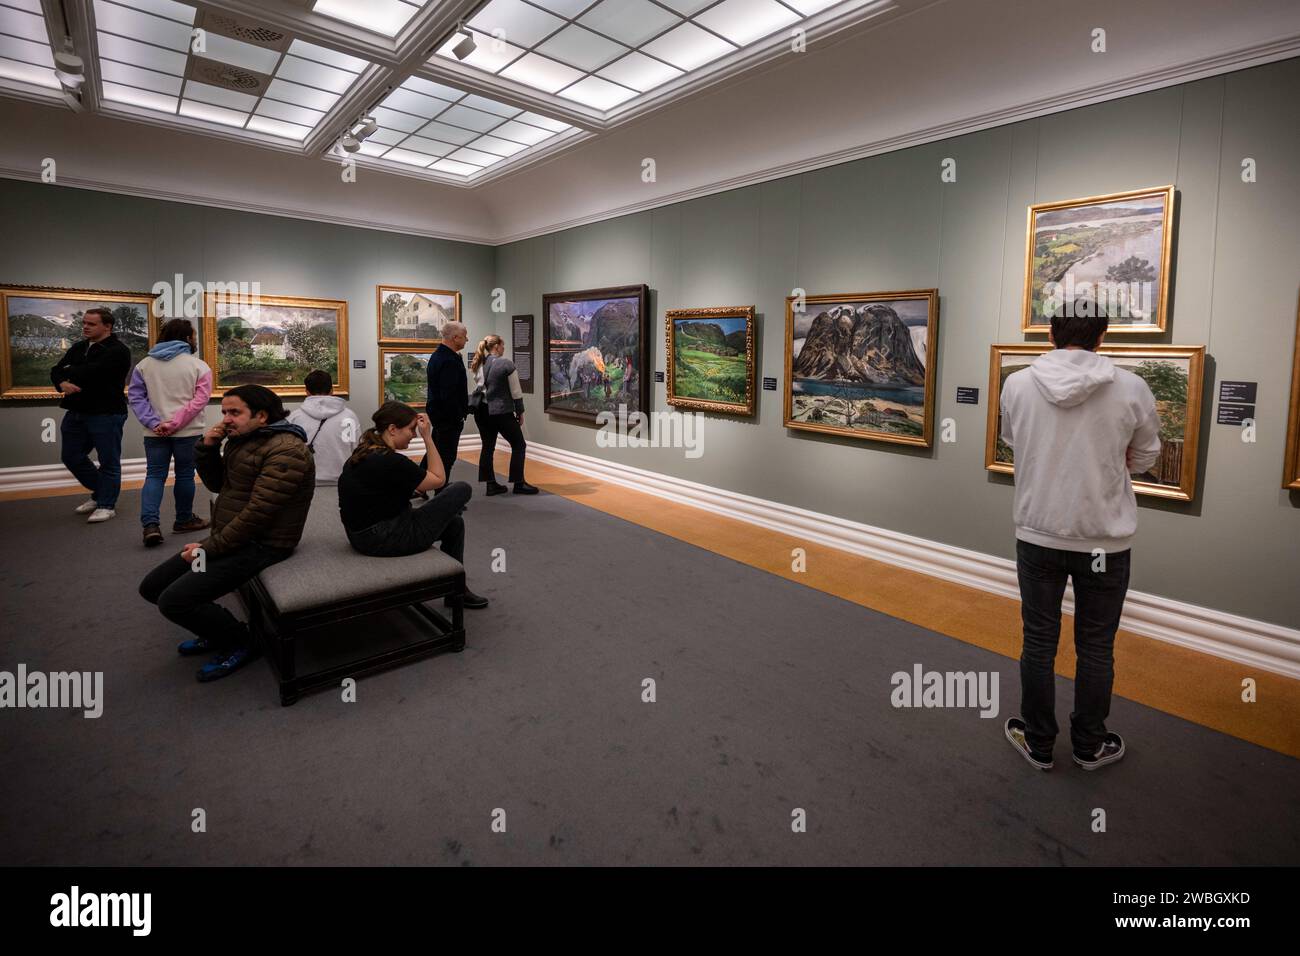 Bergen, Norway. 5th Nov, 2023. Several people look at some paintings in the exhibition of the artist Nikolai Astrup at the Rasmus Meyer Museum. The Rasmus Meyer Collection is part of the Bergen Museum of Art and houses a significant collection of works by Norwegian artists. The museum is housed in a historic house in the center of the city and is named after the distinguished dealer R Meyer, who donated his private art collection to the city in 1911. The collection includes works by various 19th and early 20th century artists, with a special focus on Edvard Munch. There are also paintings, Stock Photo